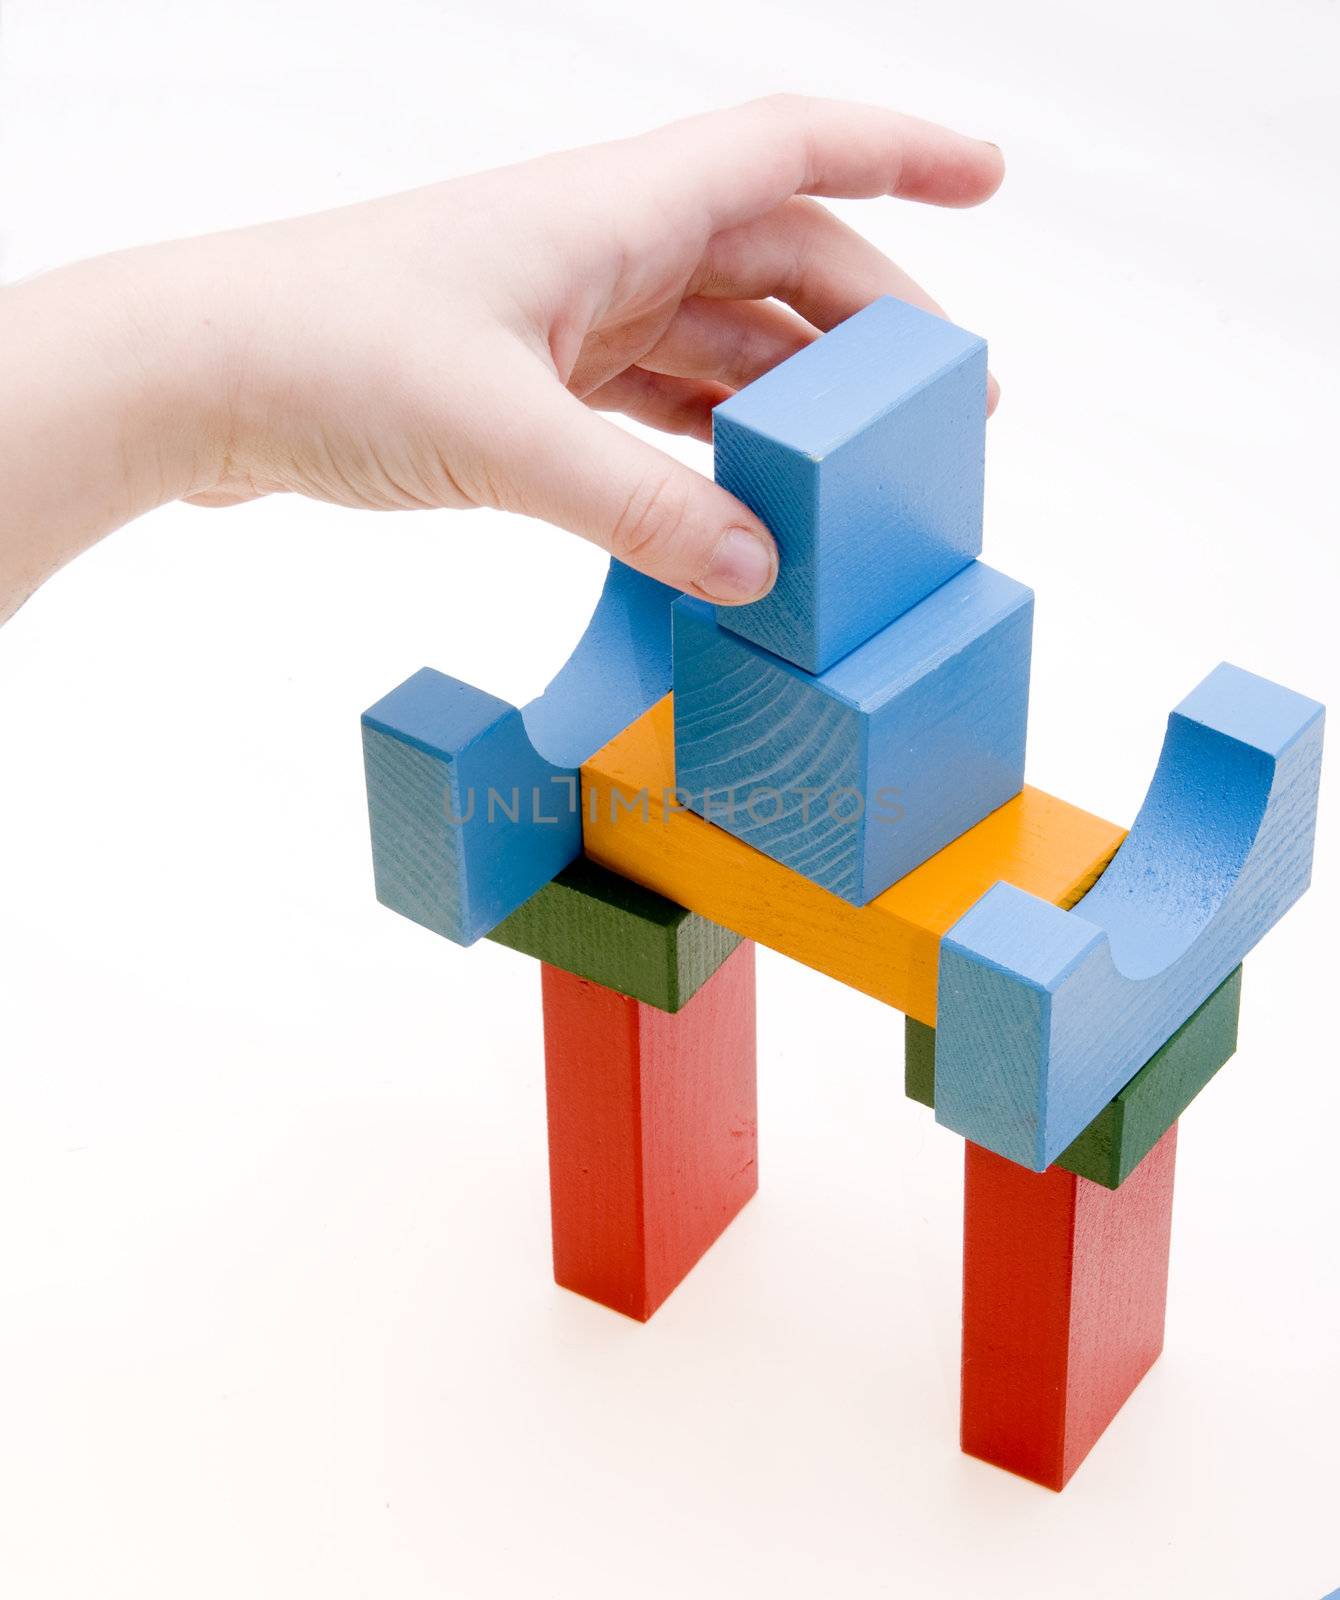 child is playing with wooden blocks - making a building